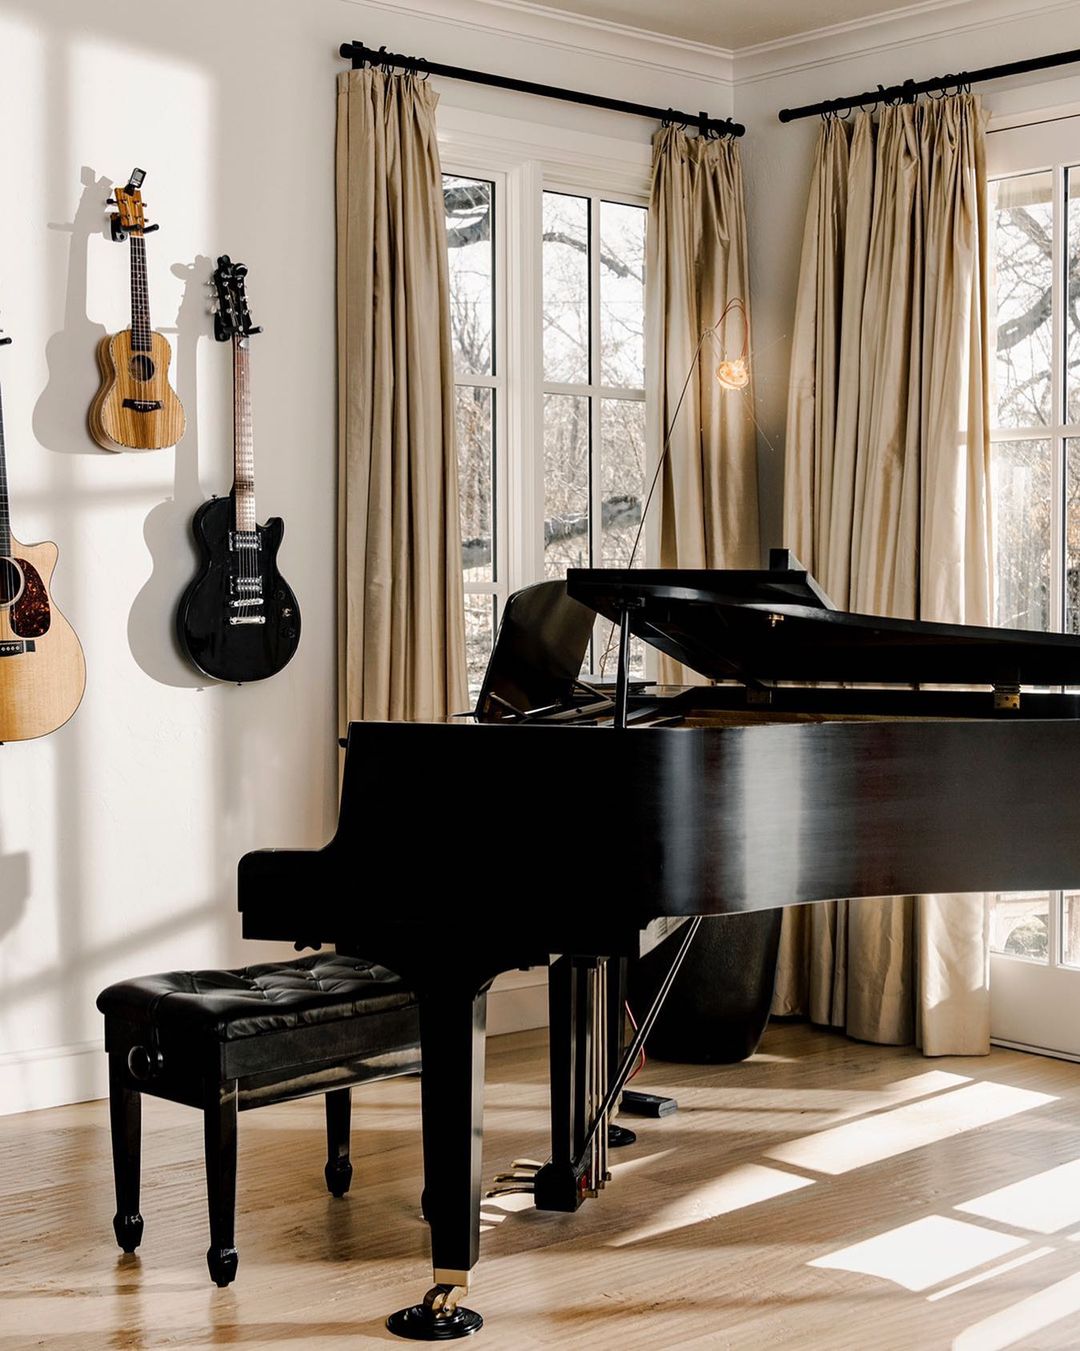 Grand Piano in a Music Room with Guitars on the Wall. Photo by Instagram user @thetonyliproject